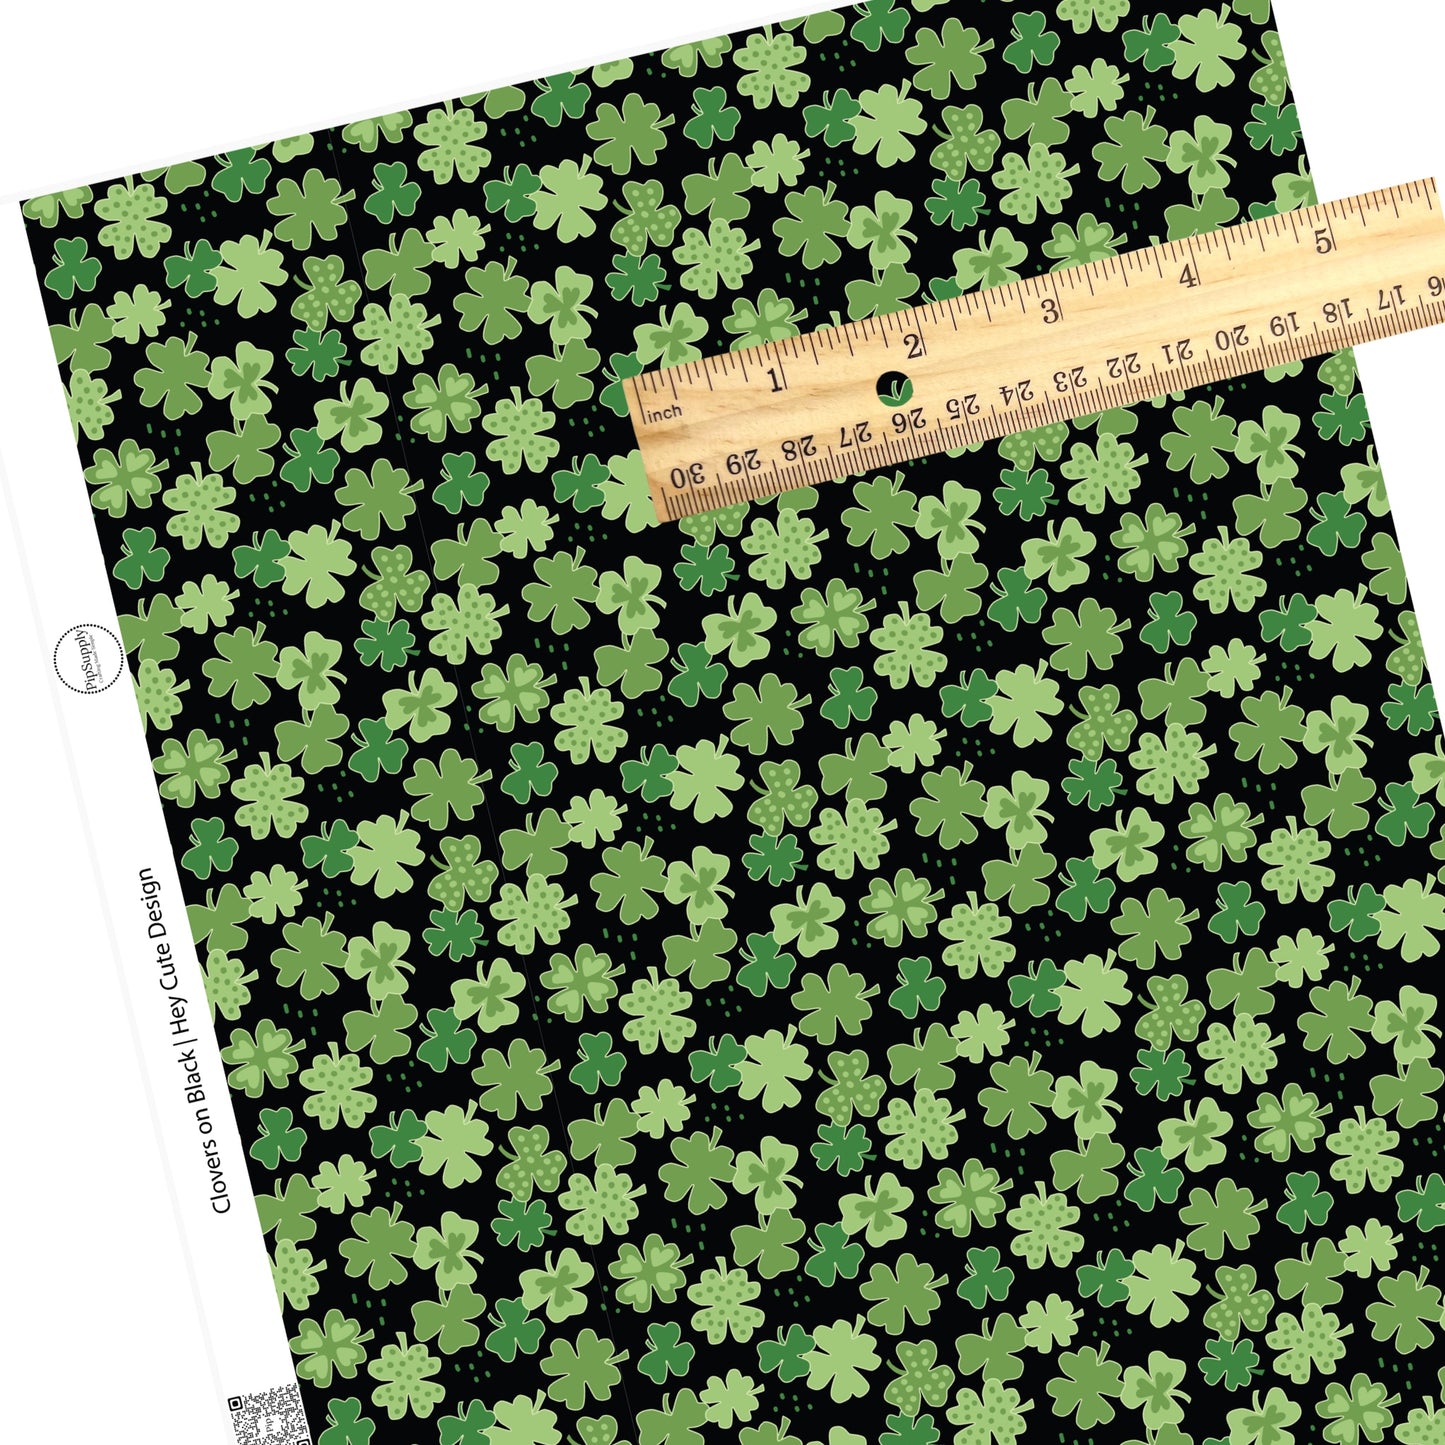 4 leaf clovers with light green hearts and light green clovers with dark green polka dots and disperse dots on a black faux leather sheet